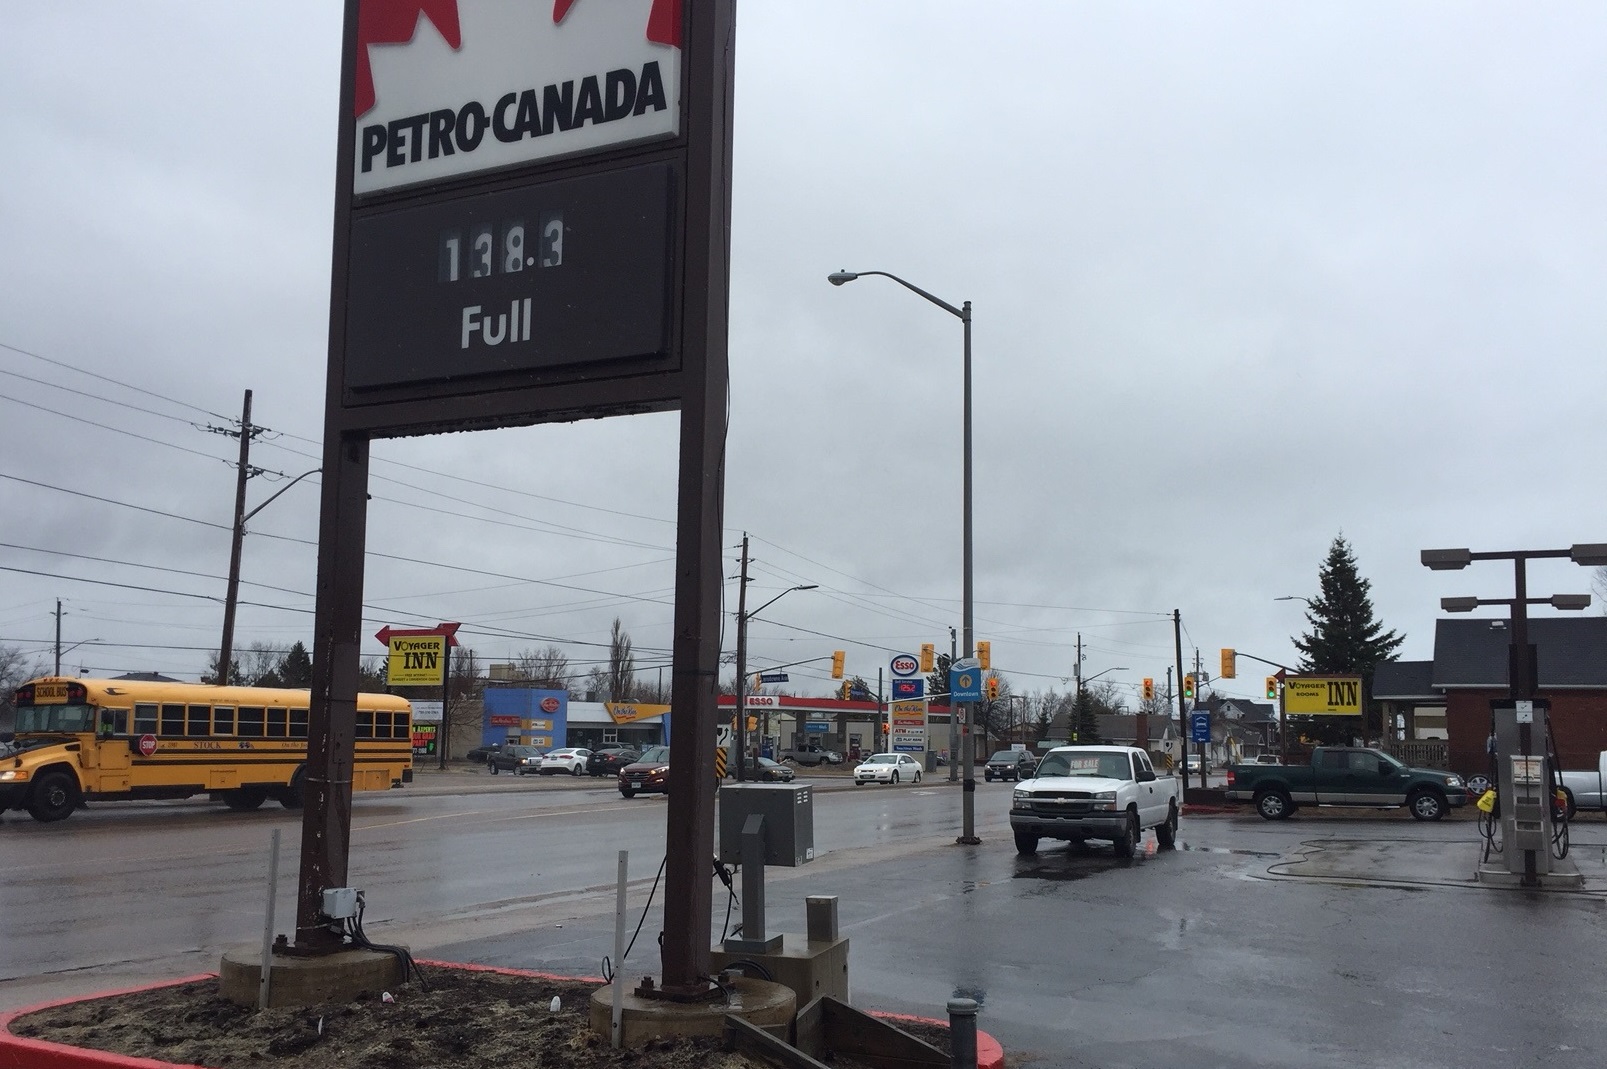 Canadian Tire to Convert More Than 200 Stations to the Petro-Canada Brand